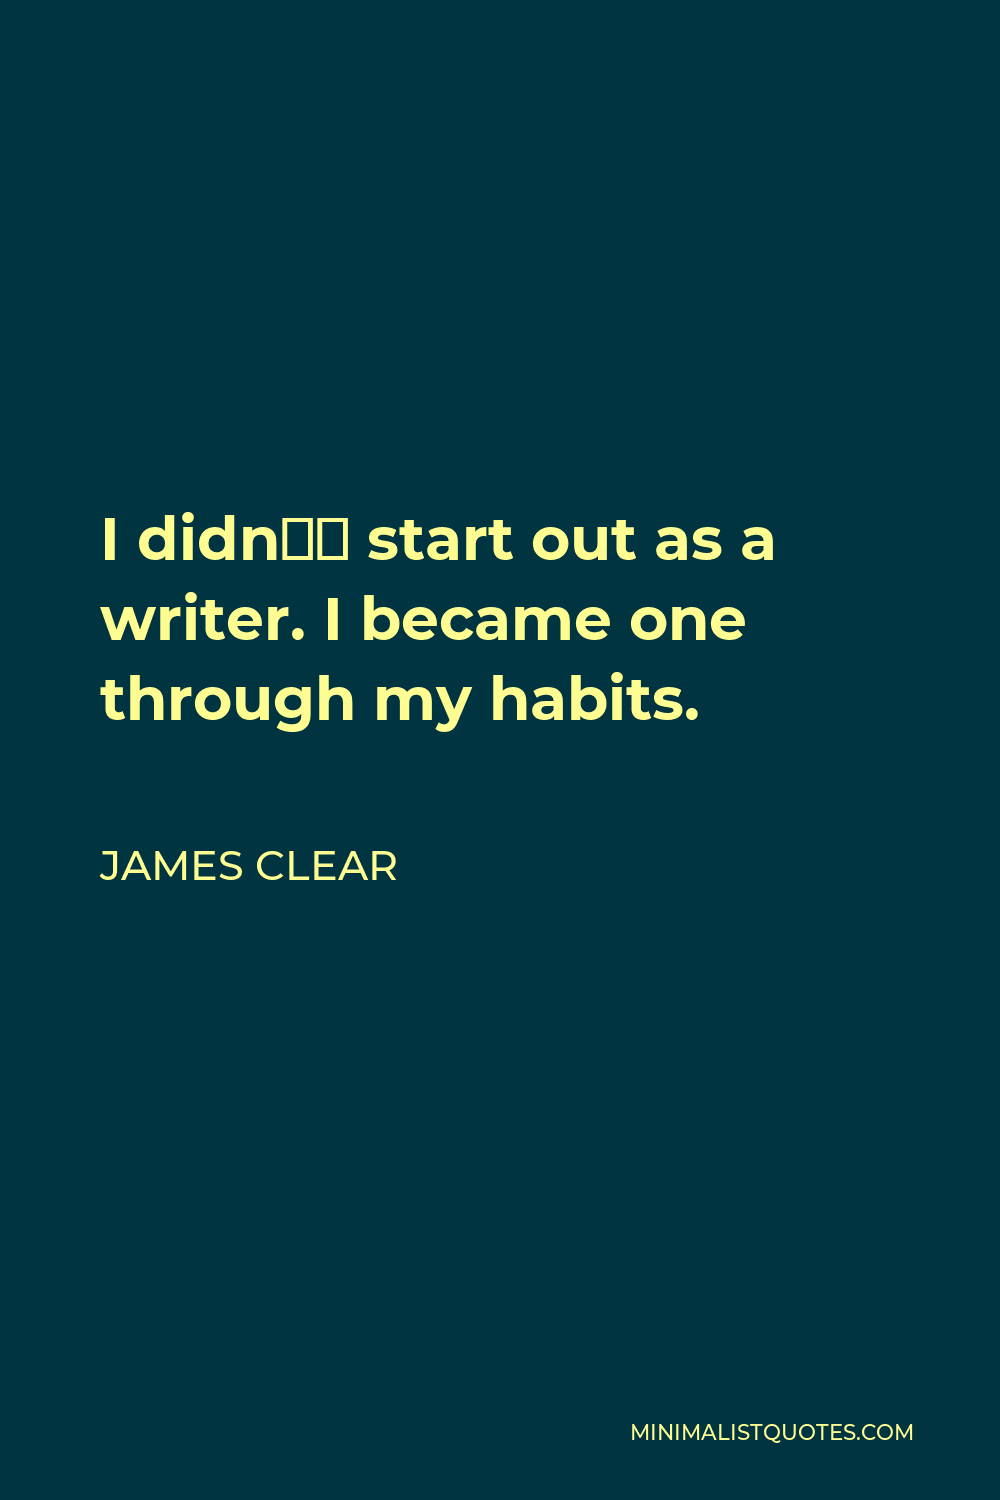 James Clear Quote - I didn’t start out as a writer. I became one through my habits.